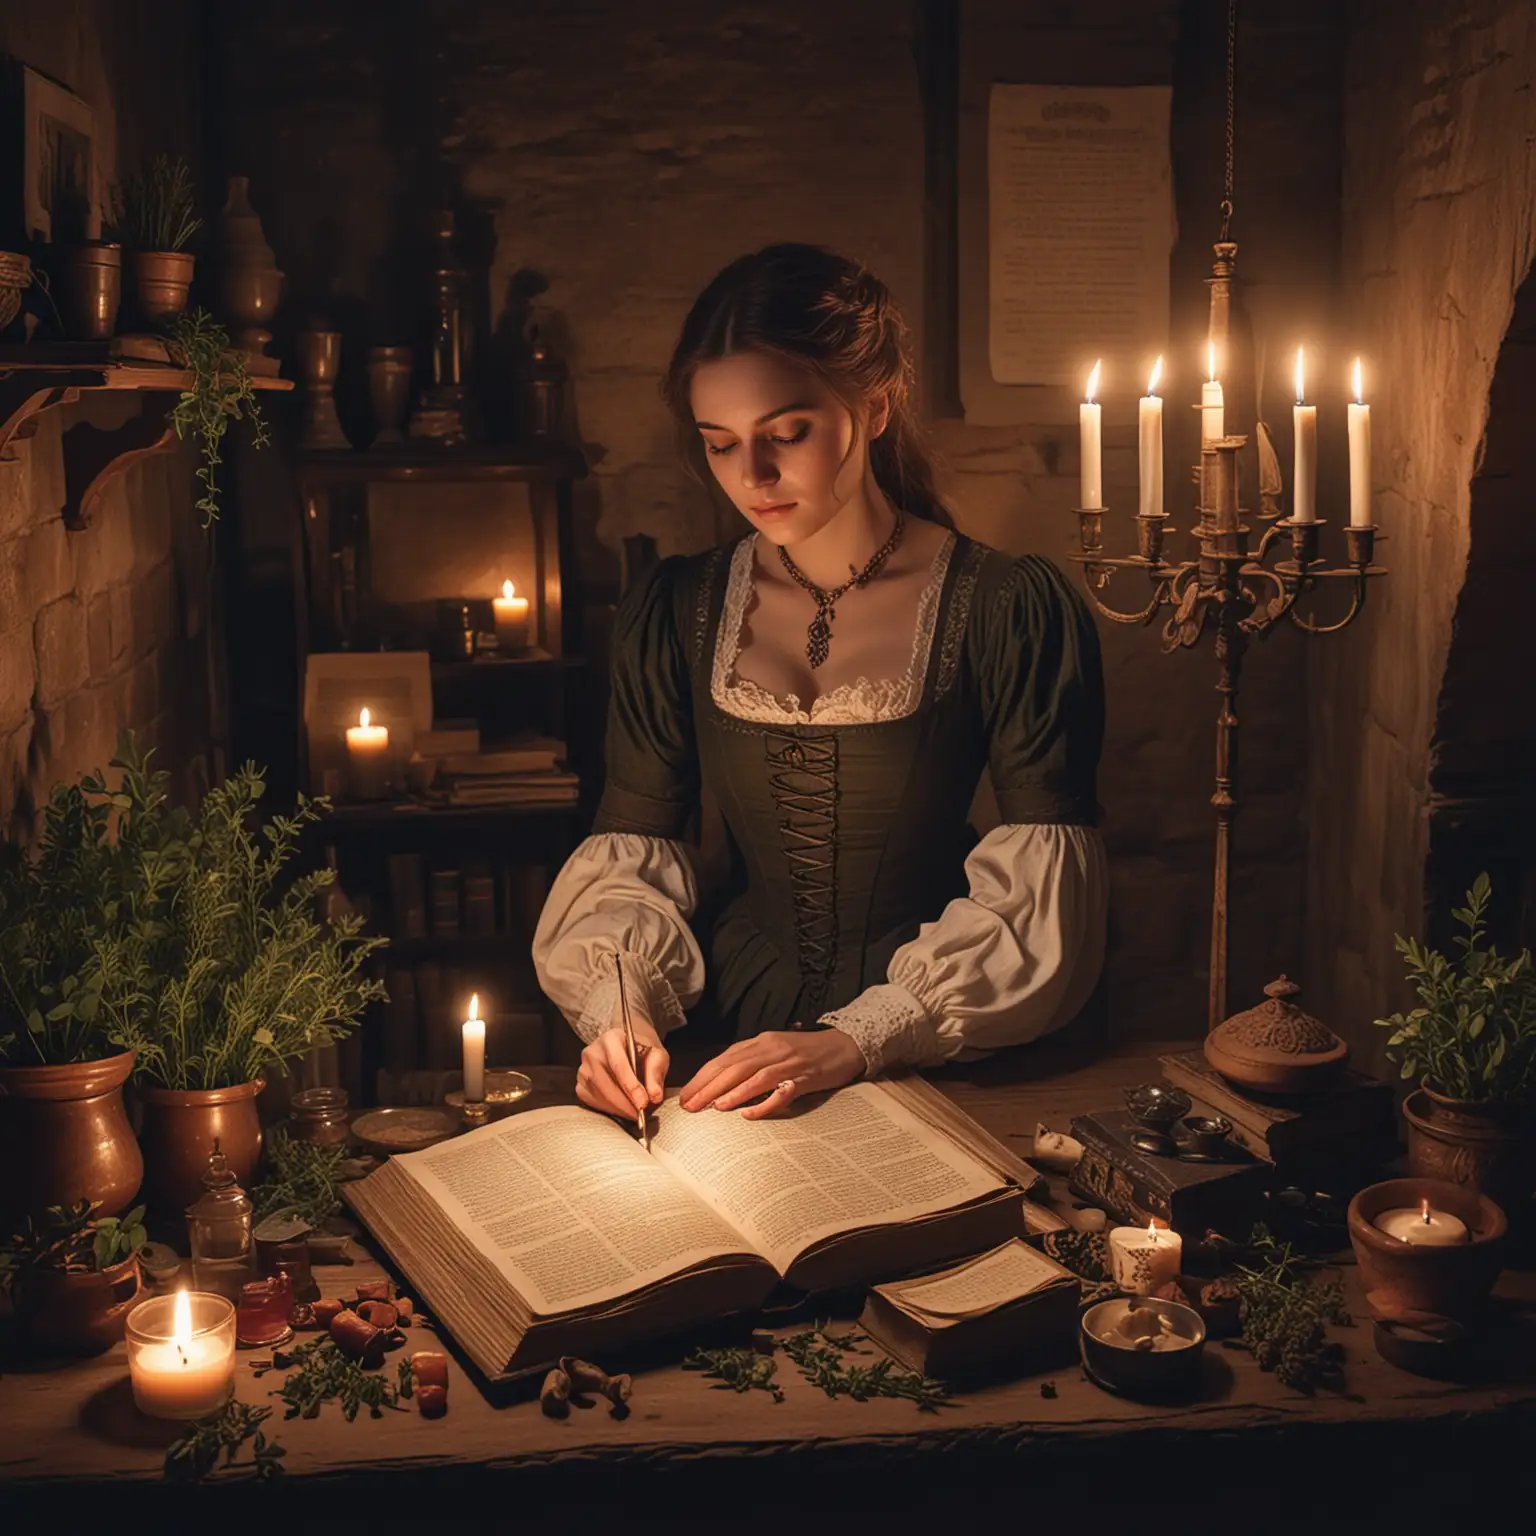 Victorian Woman Performing Ancient Ritual in Medieval Room